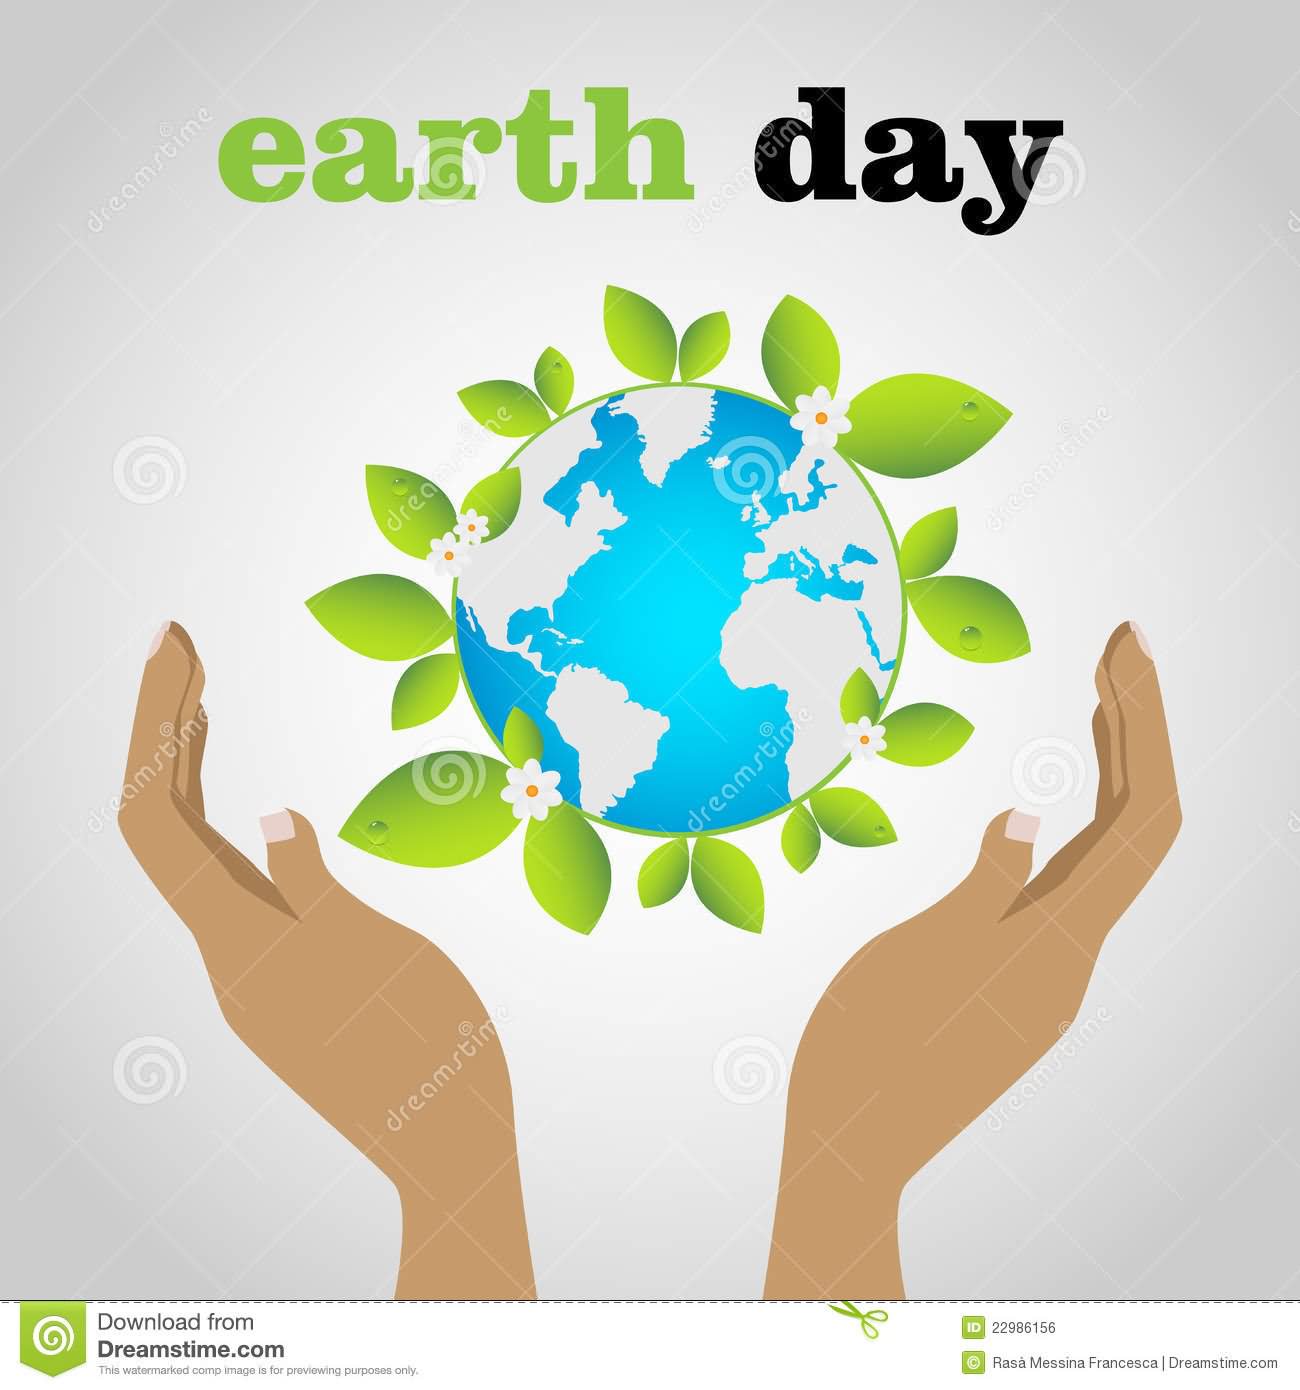 free clipart earth day april 22 - photo #42